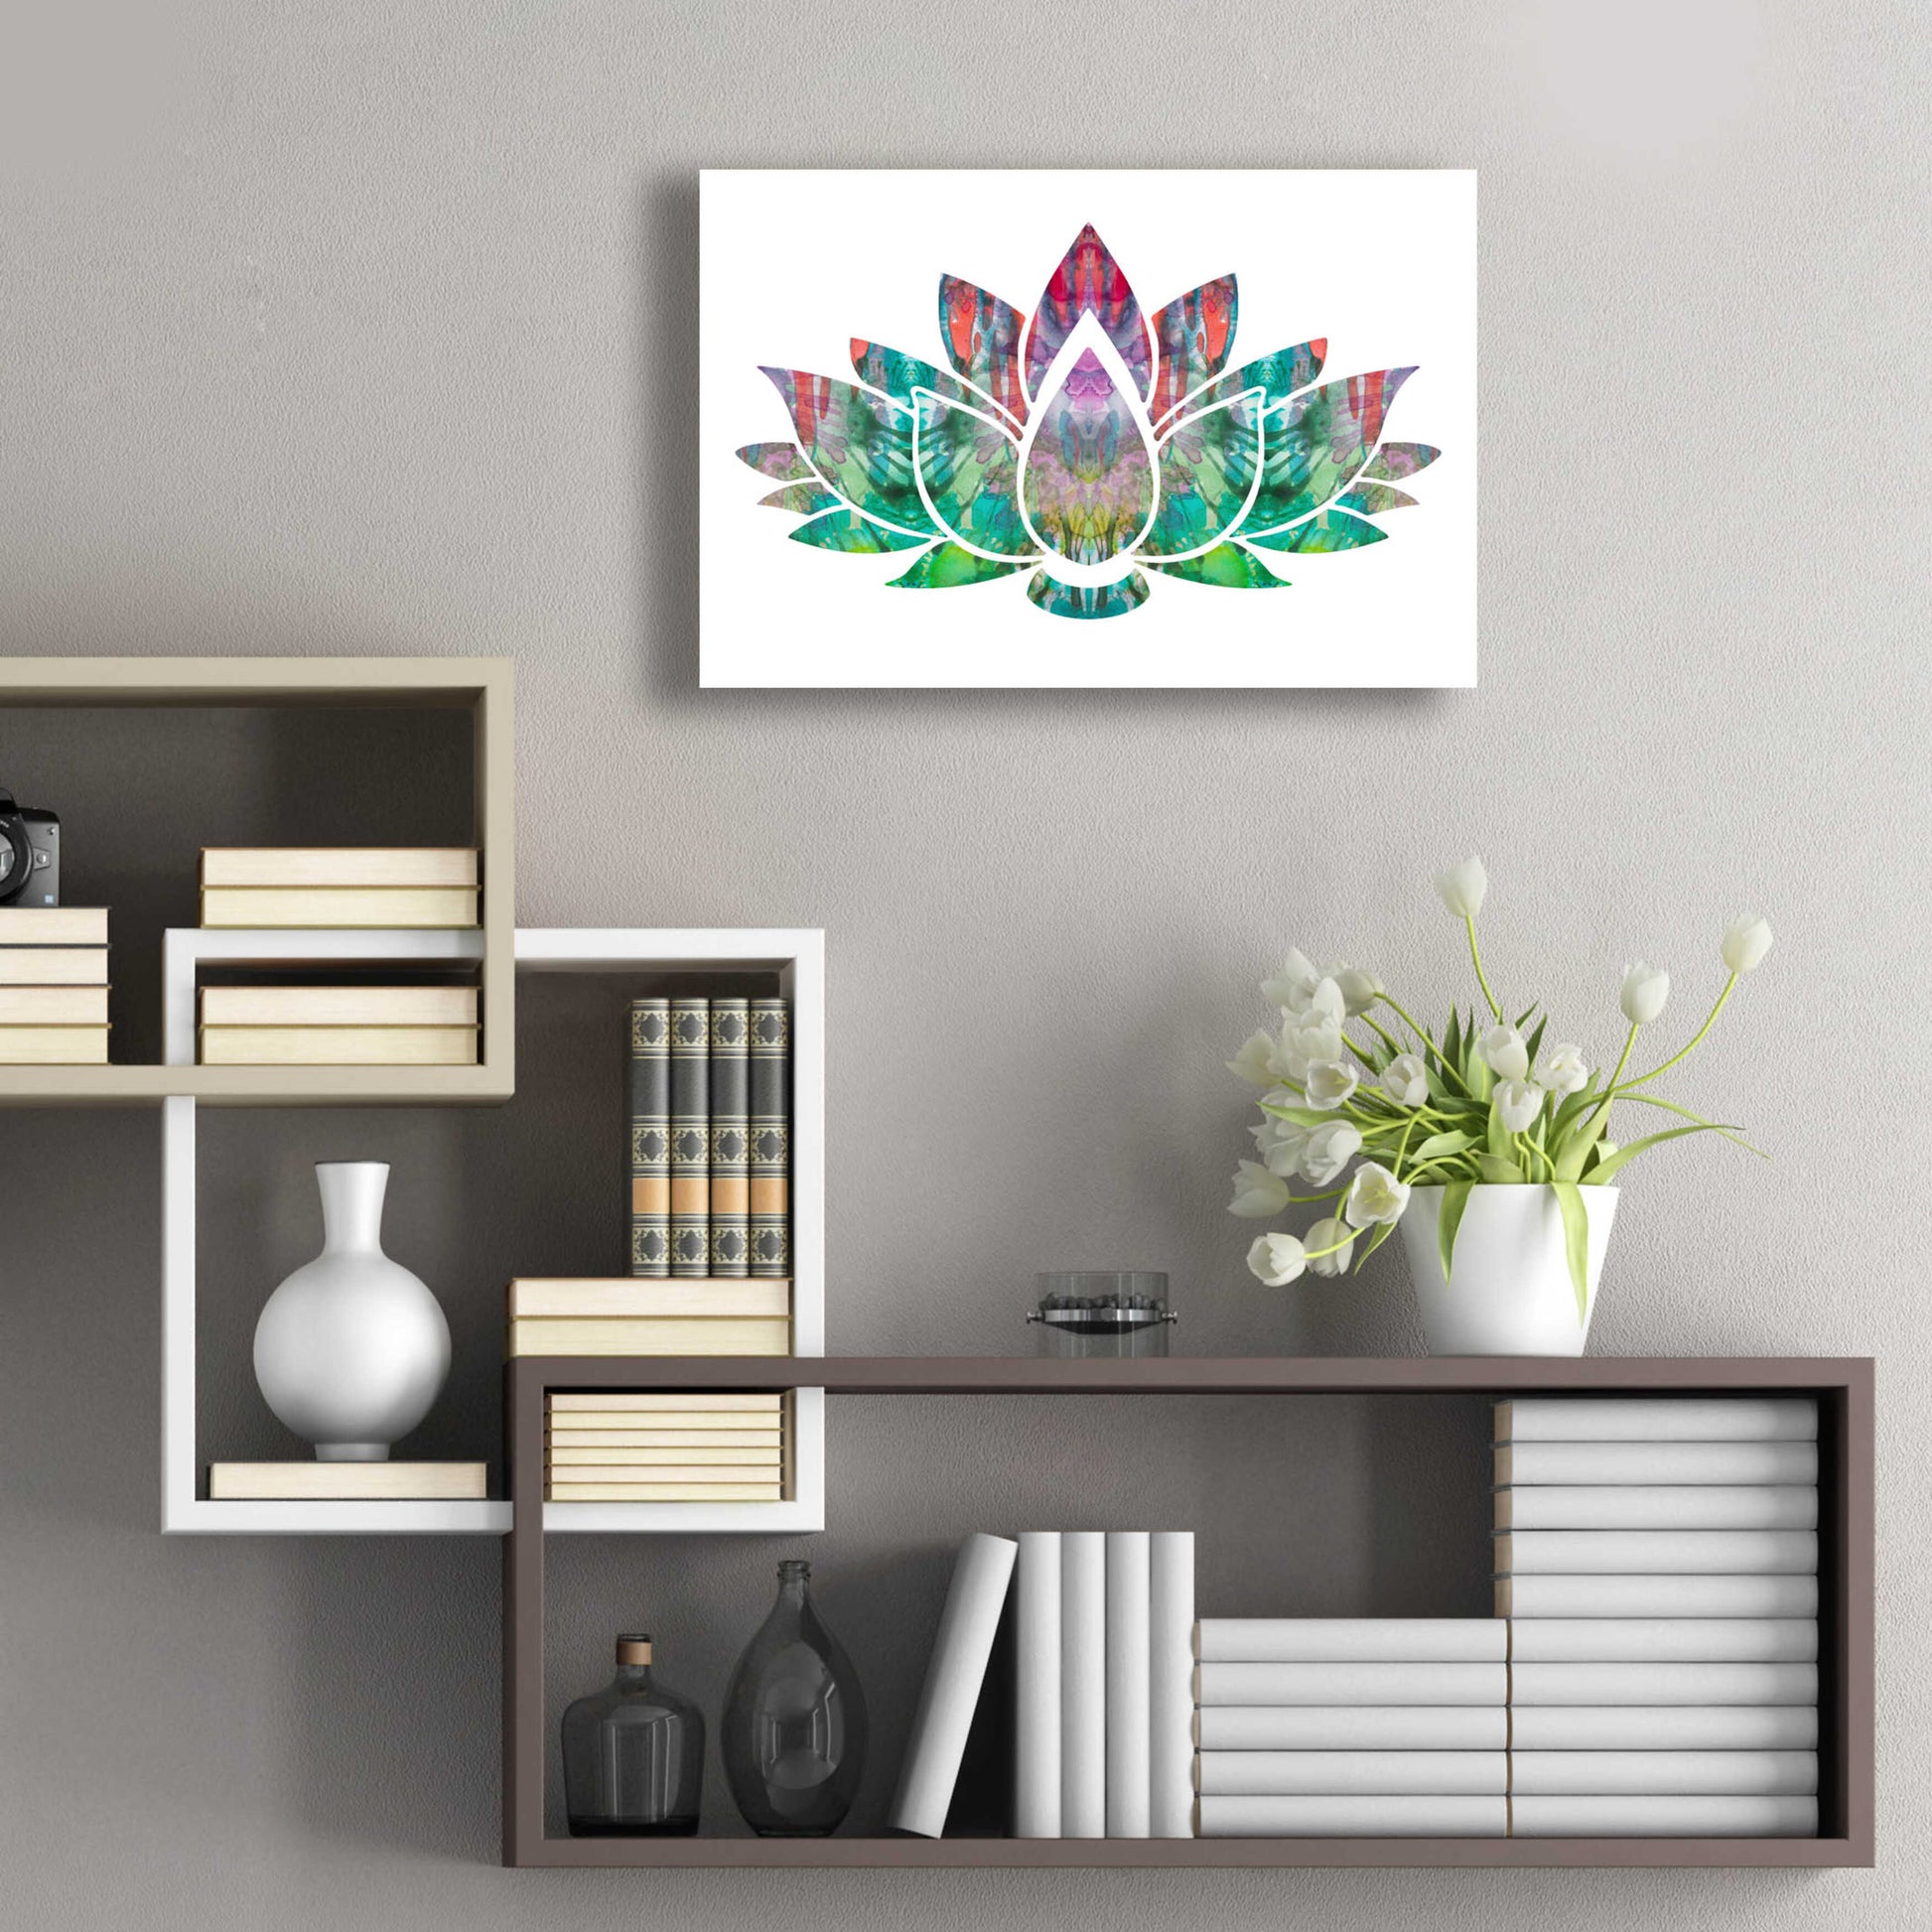 Epic Art 'Lotus' by Dean Russo, Acrylic Glass Wall Art,24x16